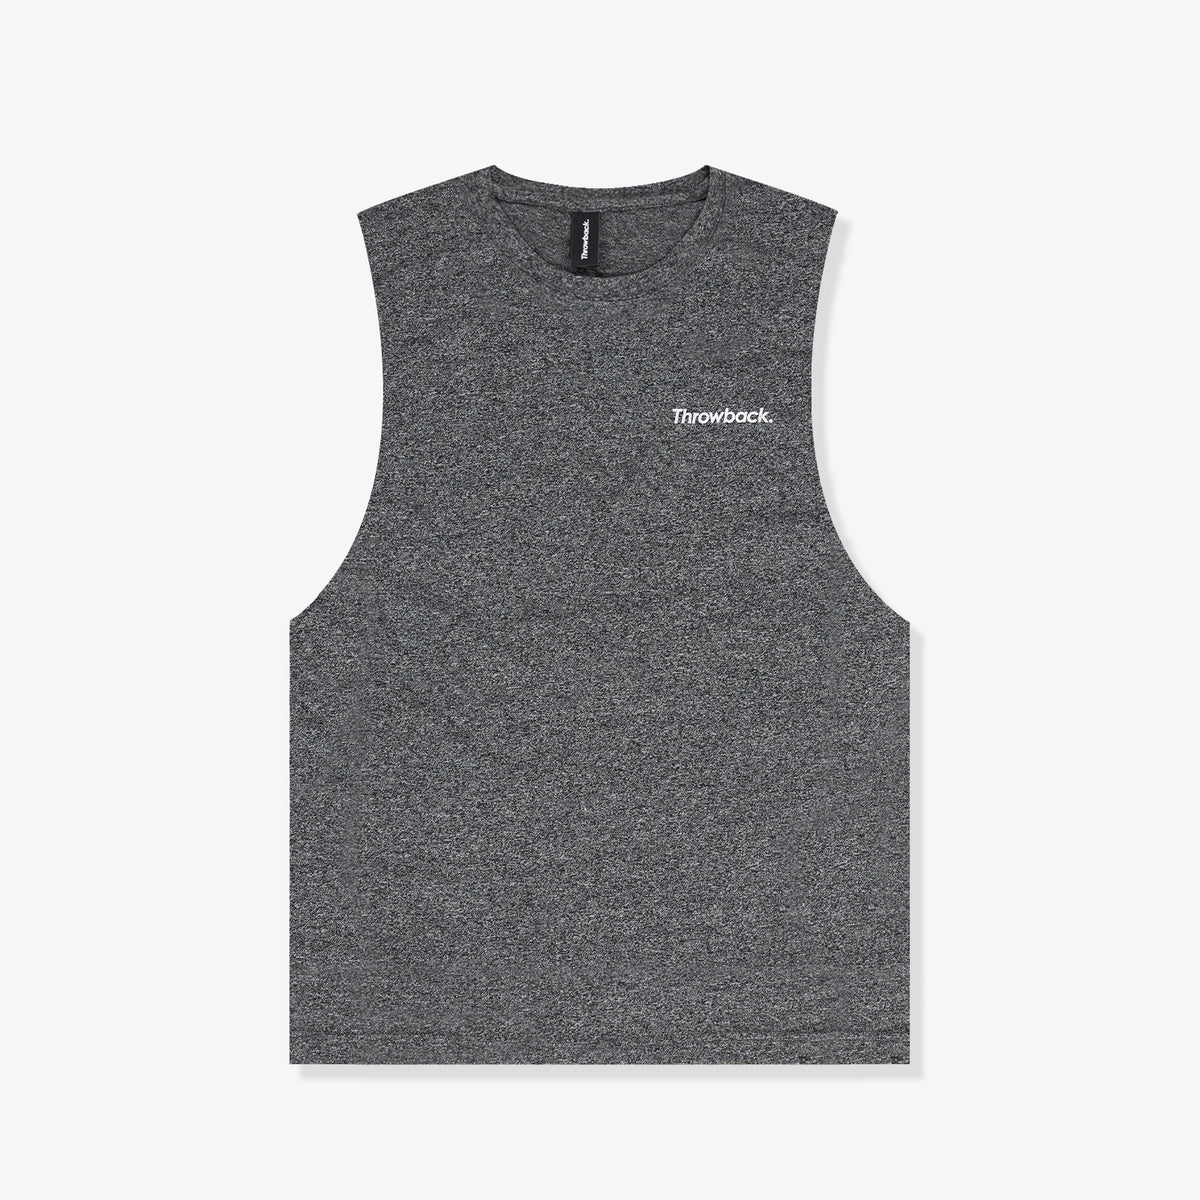 Throwback Cross Fit Shooter Tank 2.0 - Charcoal Marl